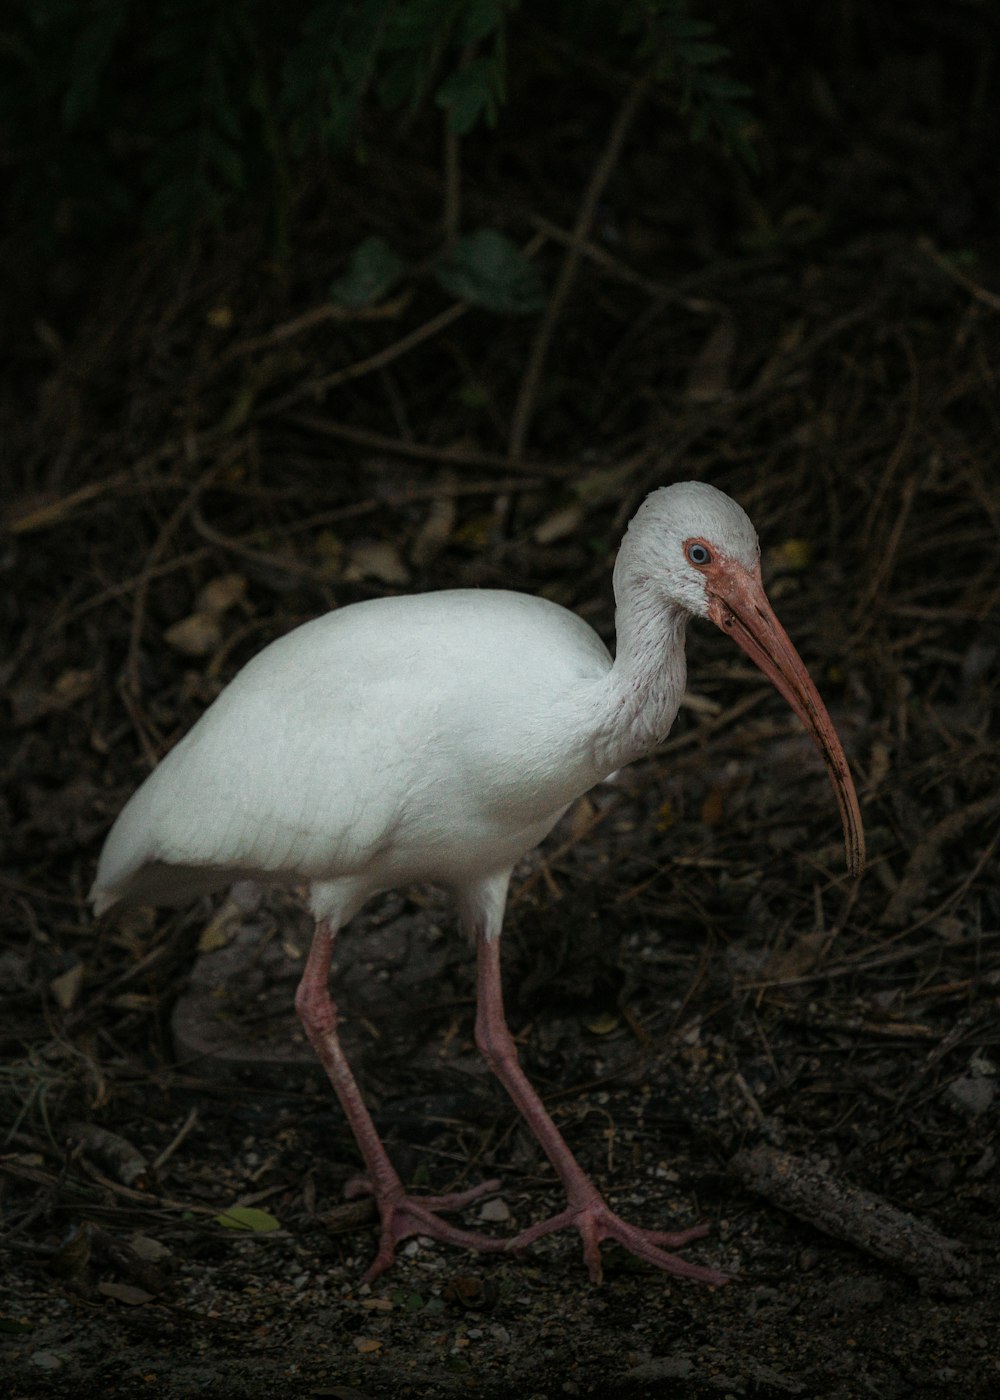 a white bird with a long beak standing on the ground